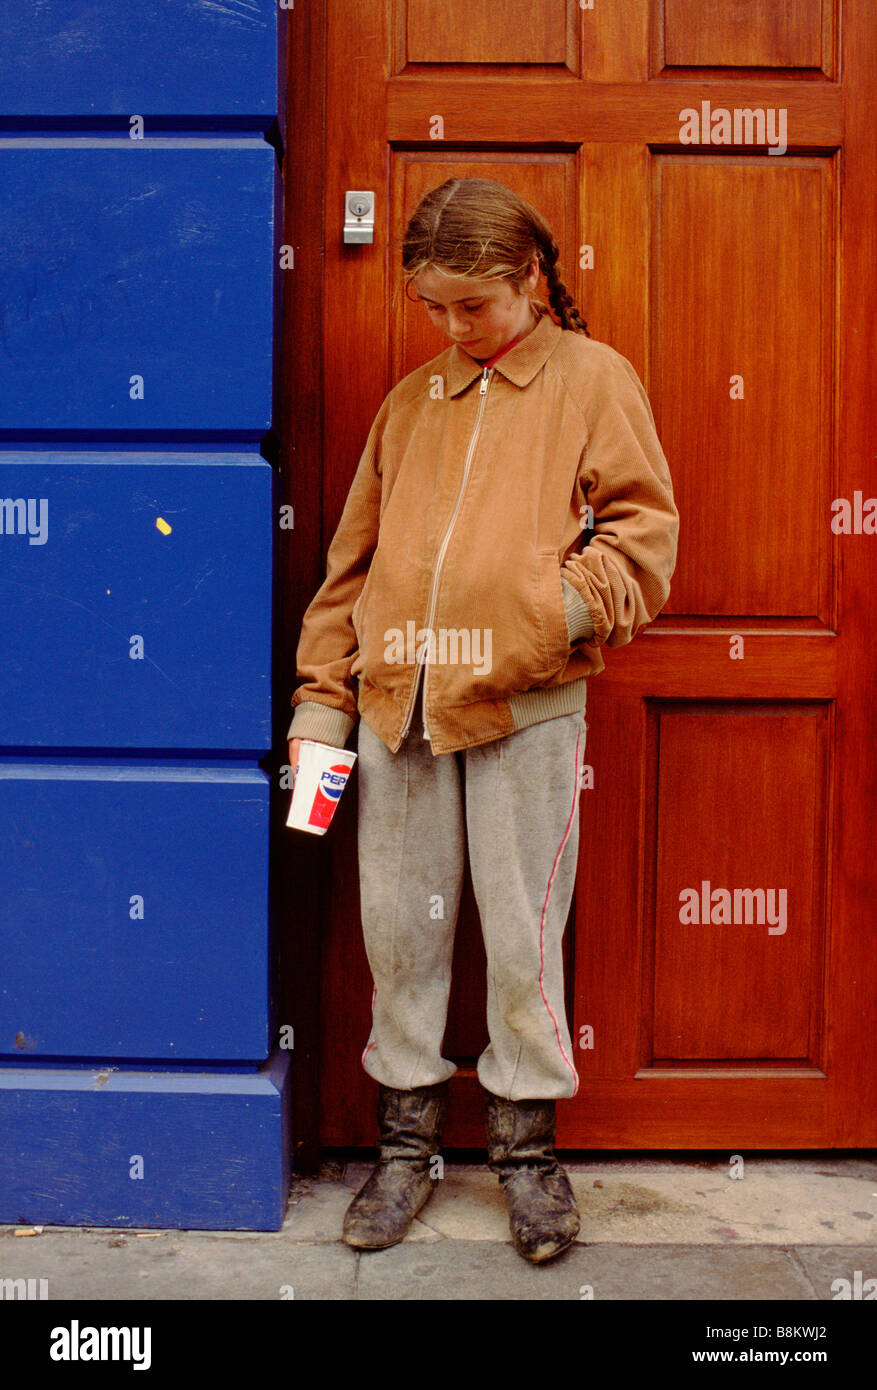 Dublin Ireland: A child begs on the streets Stock Photo - Alamy